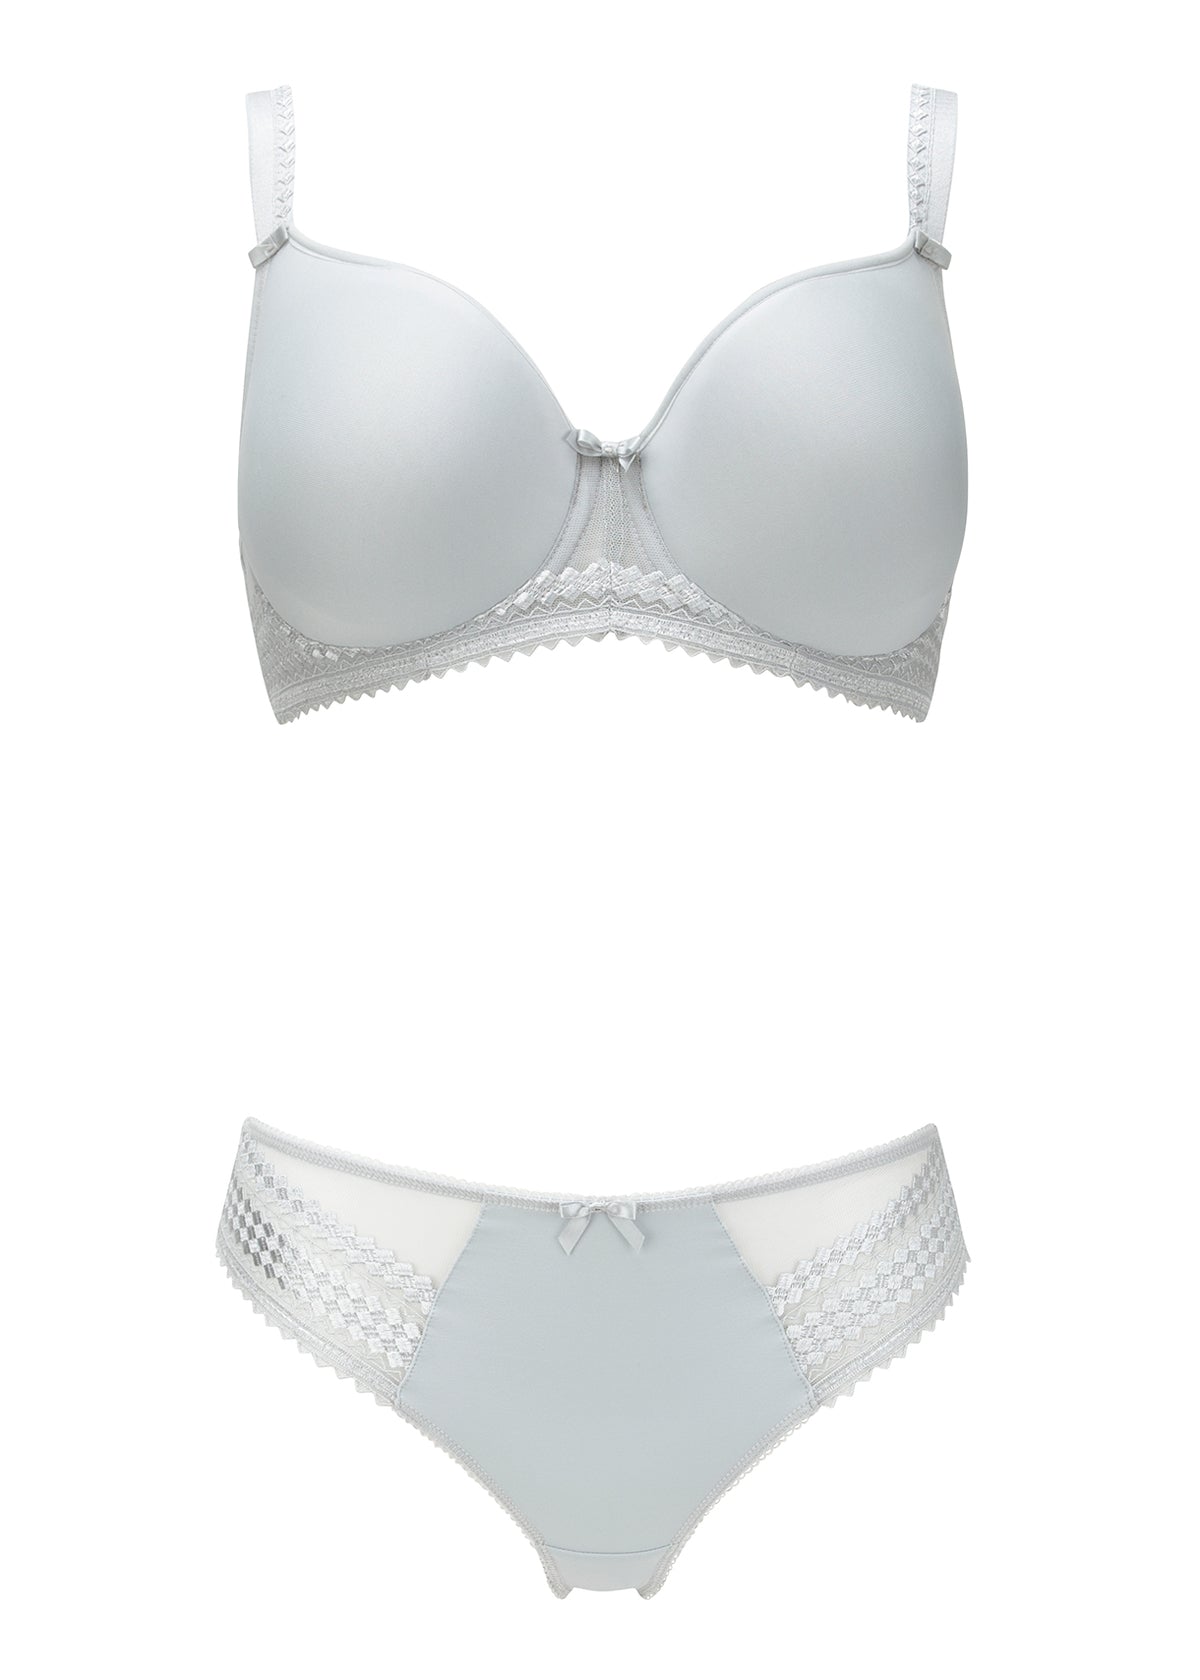 Ana White Spacer Moulded Bra from Fantasie